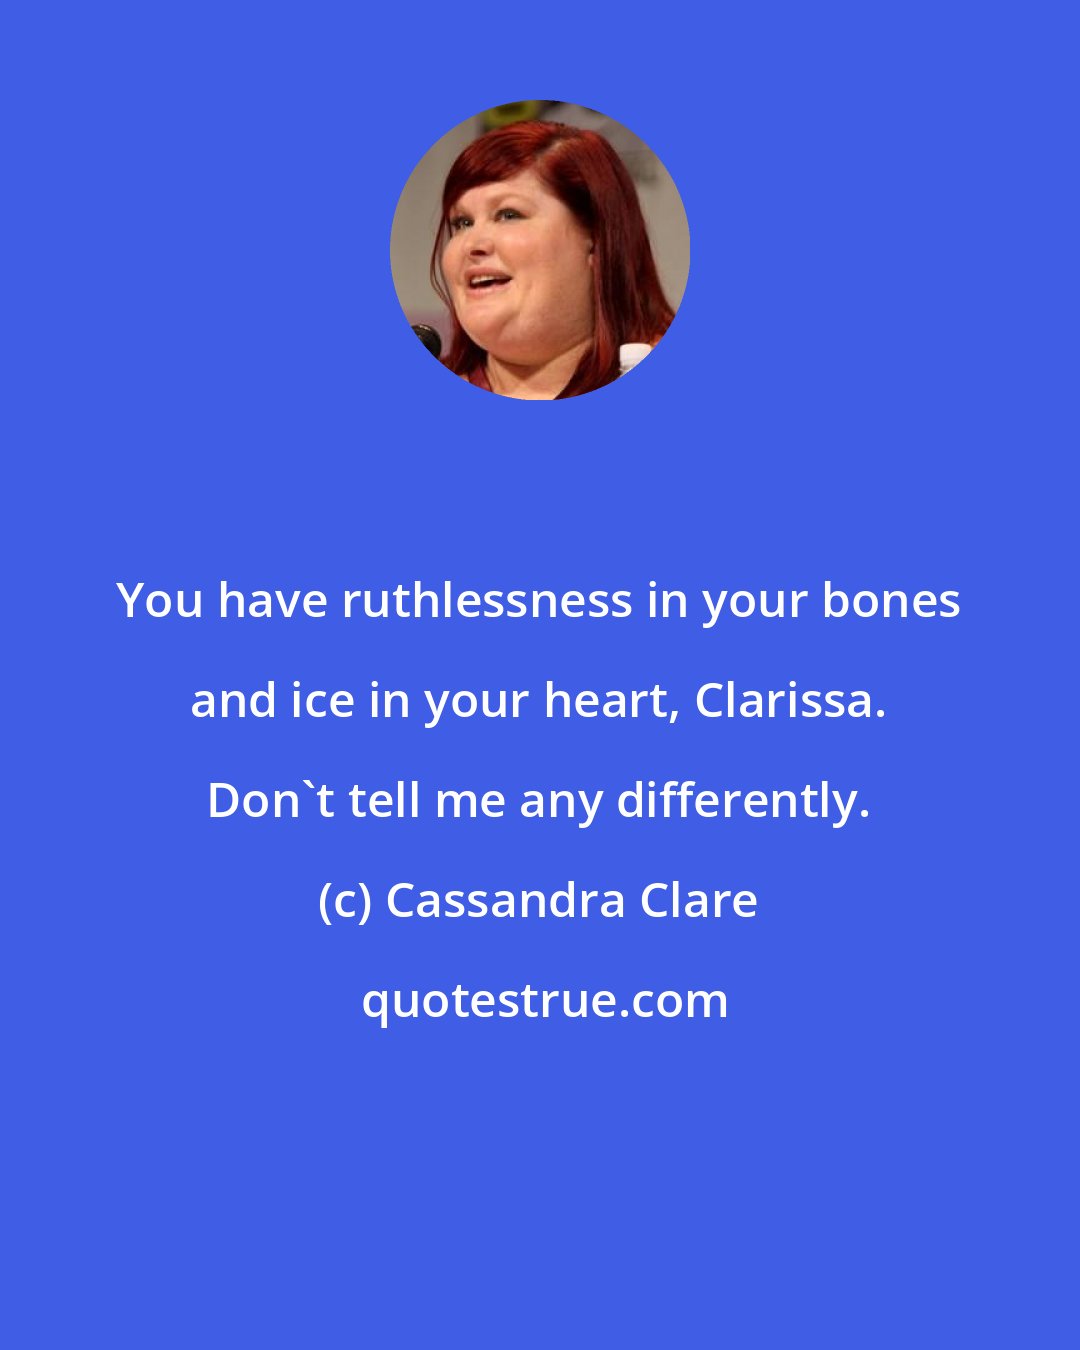 Cassandra Clare: You have ruthlessness in your bones and ice in your heart, Clarissa. Don't tell me any differently.